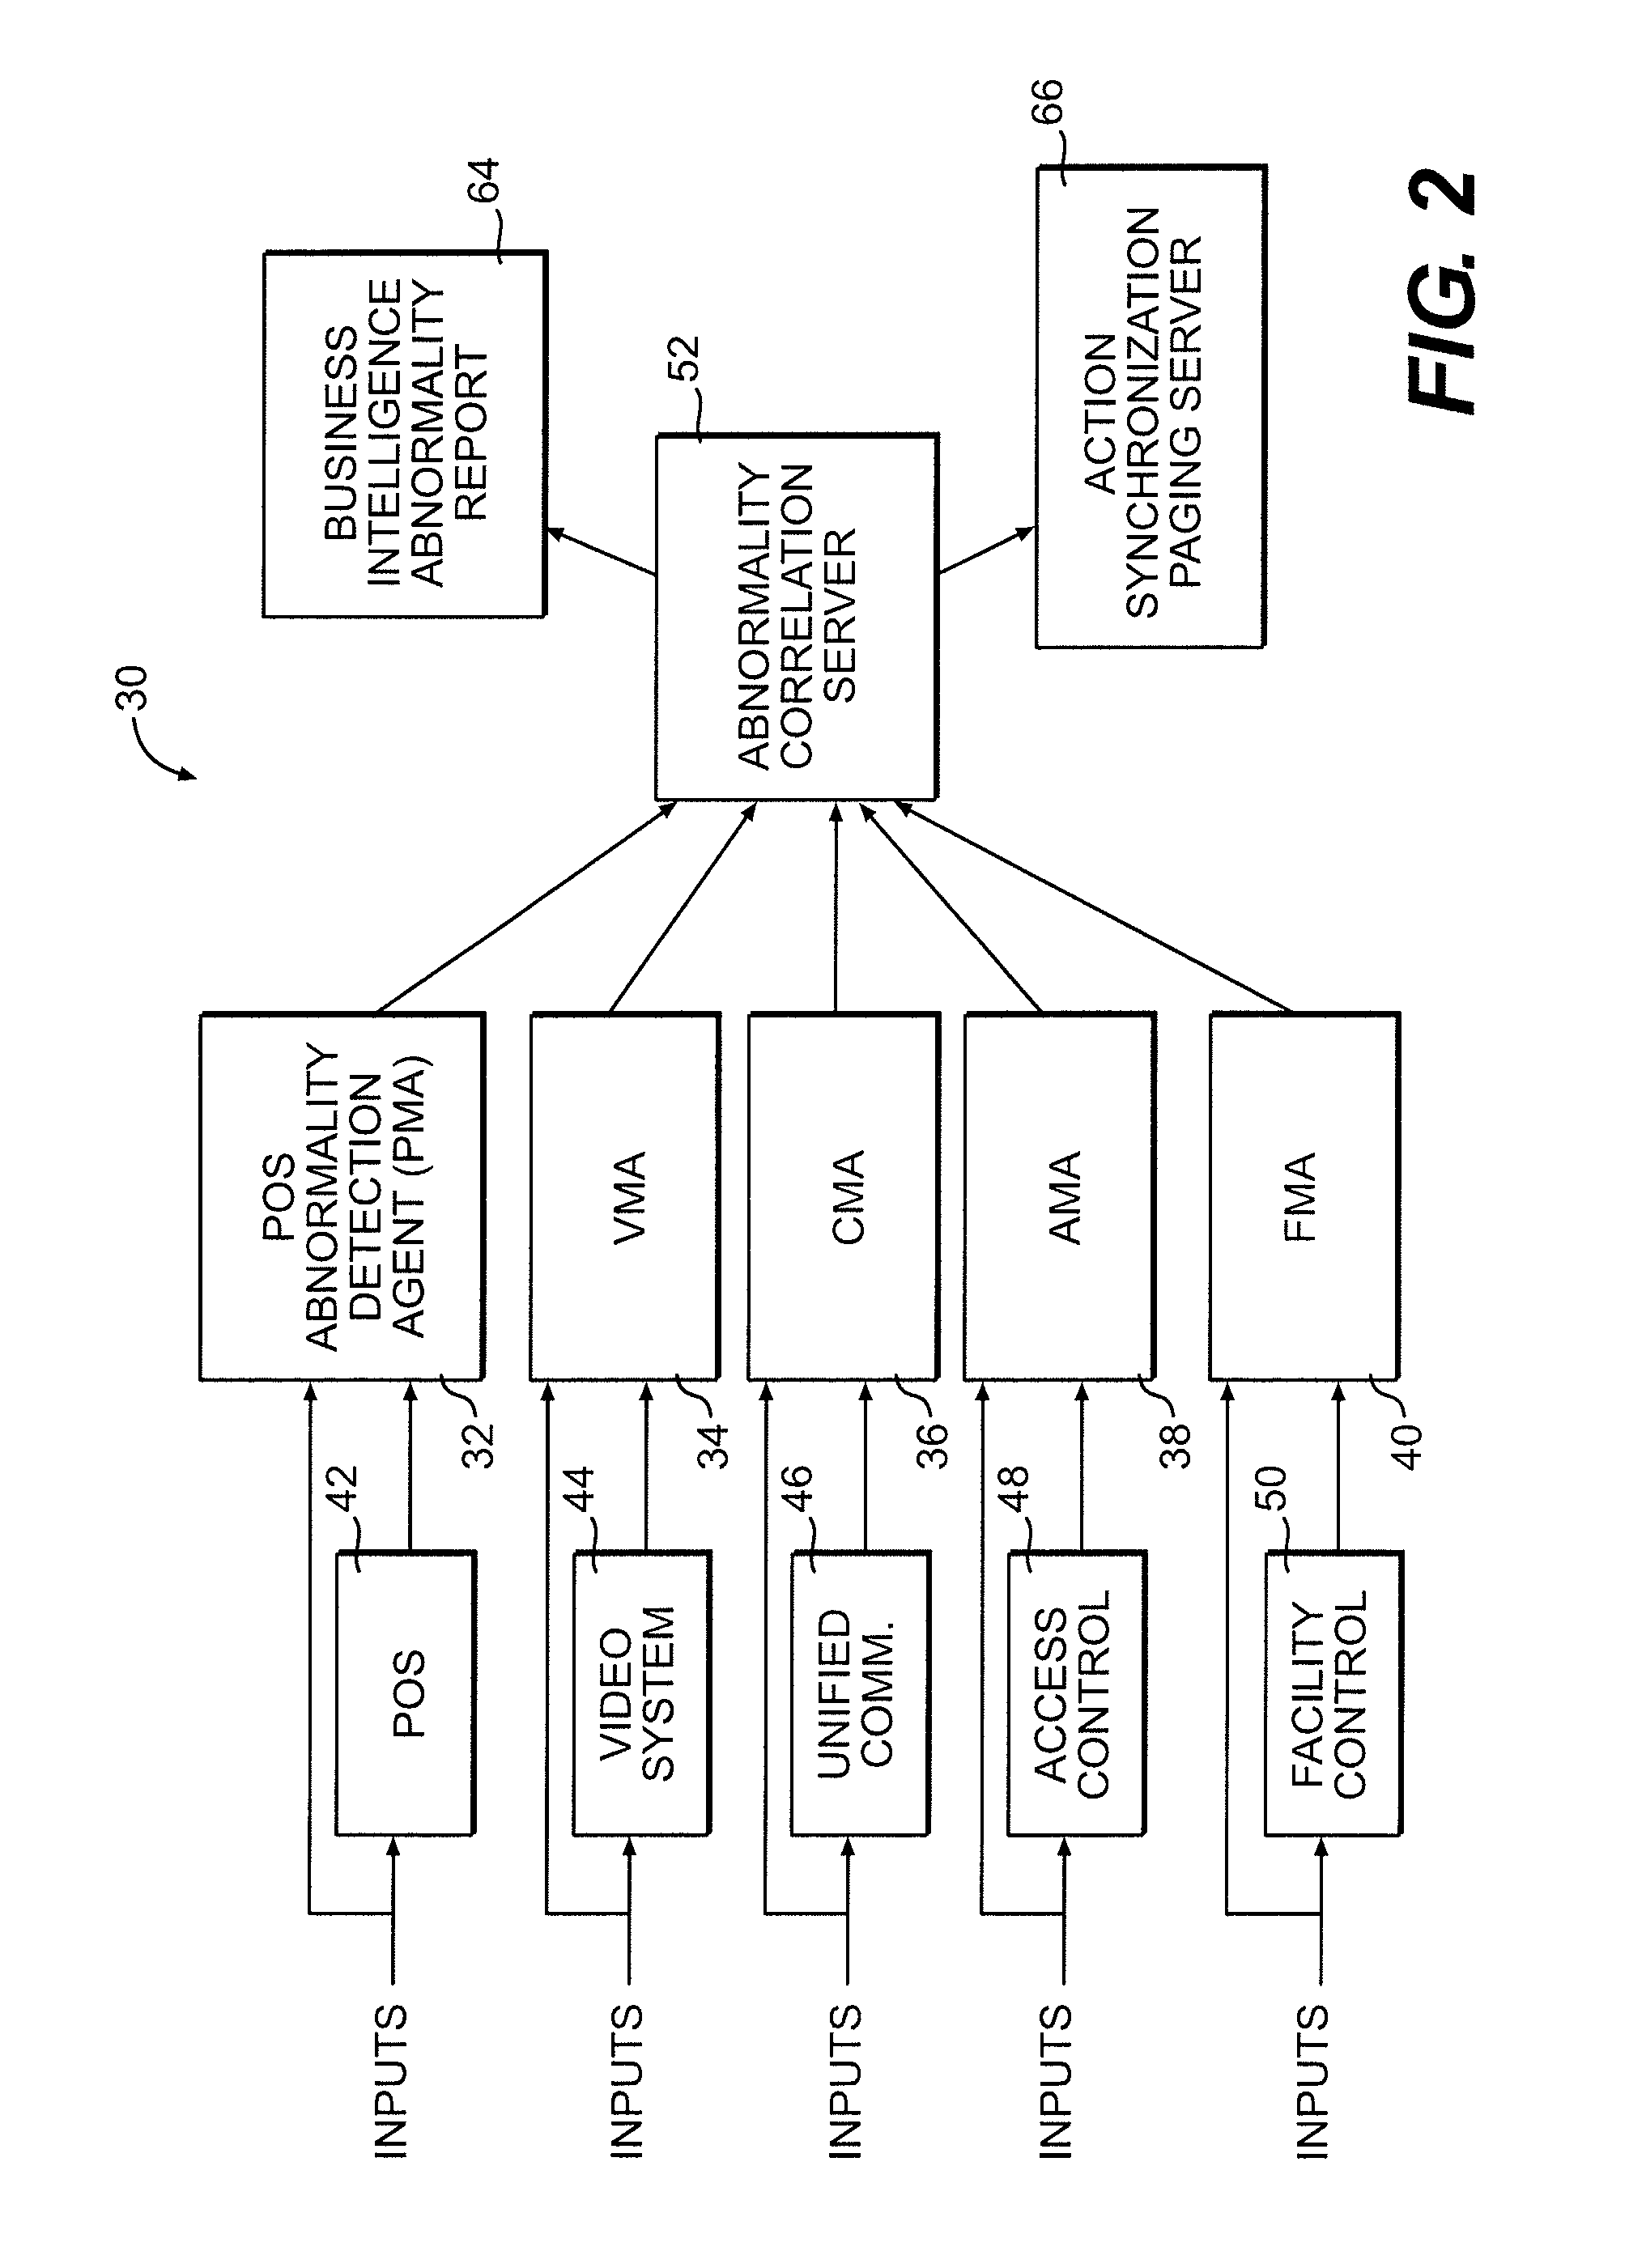 System and method for site abnormality recording and notification